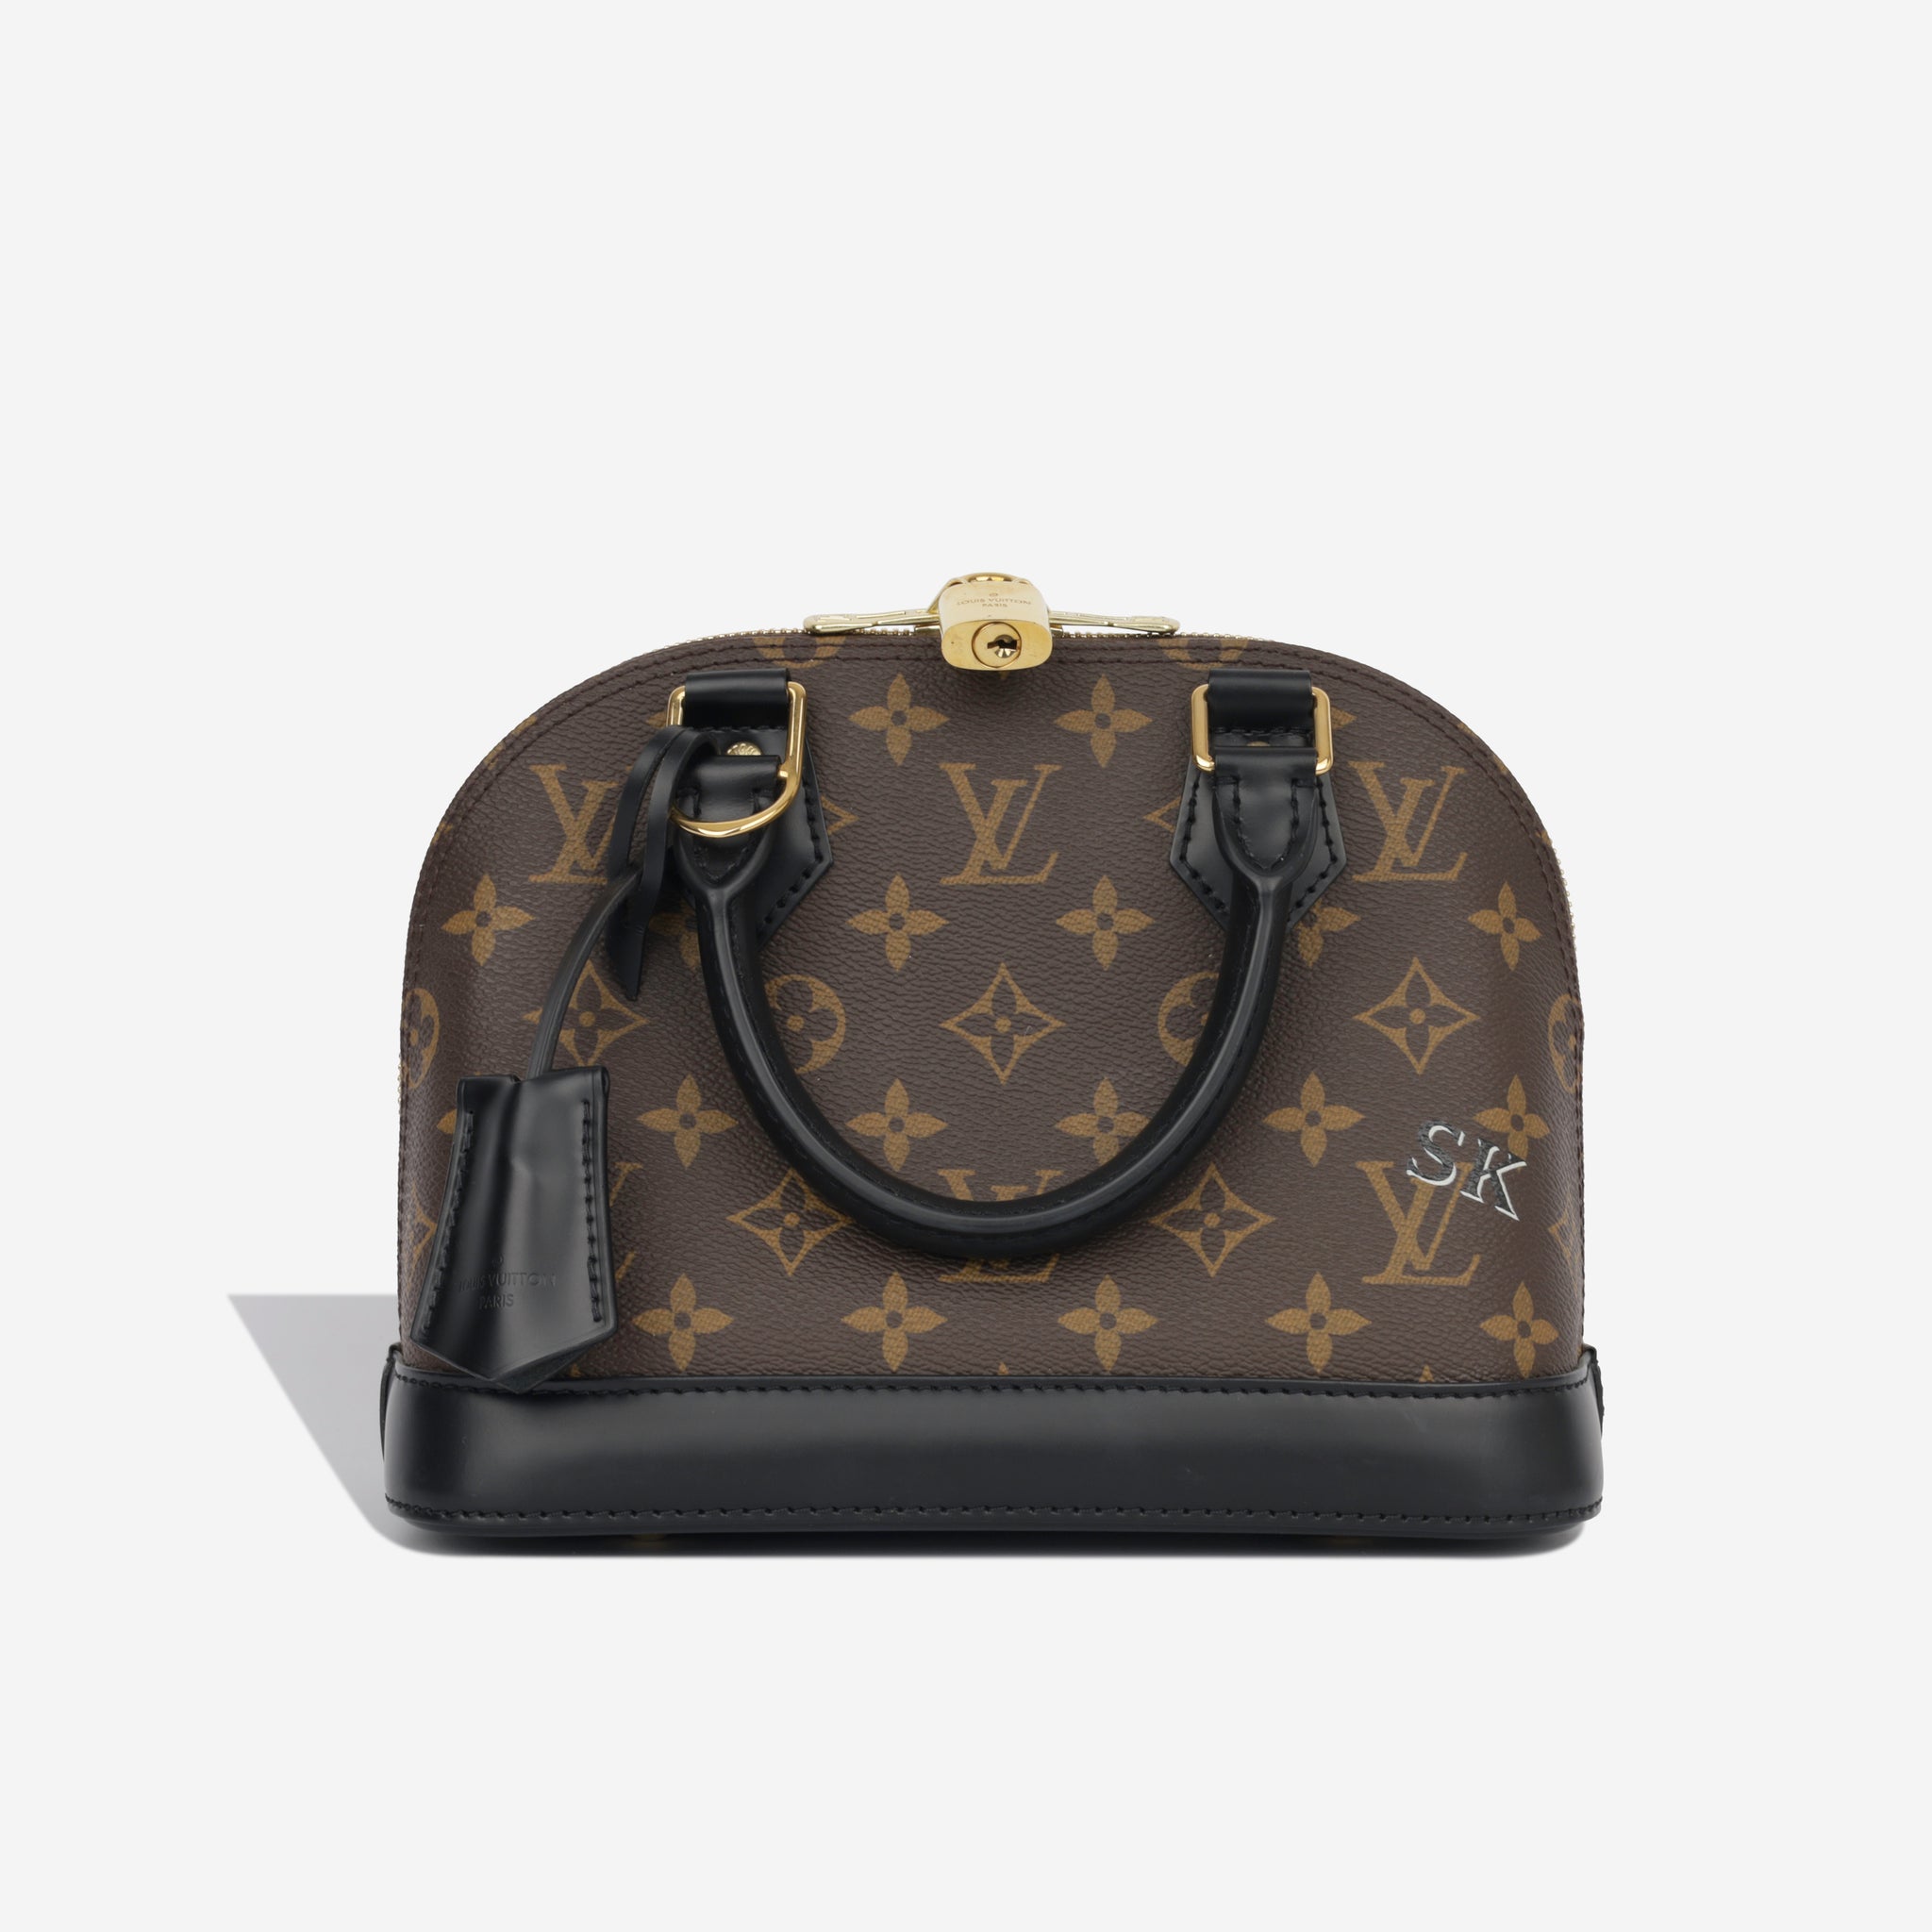 LOUIS VUITTON LOCKME II BB REVIEW // OVERVIEW, WHAT FITS